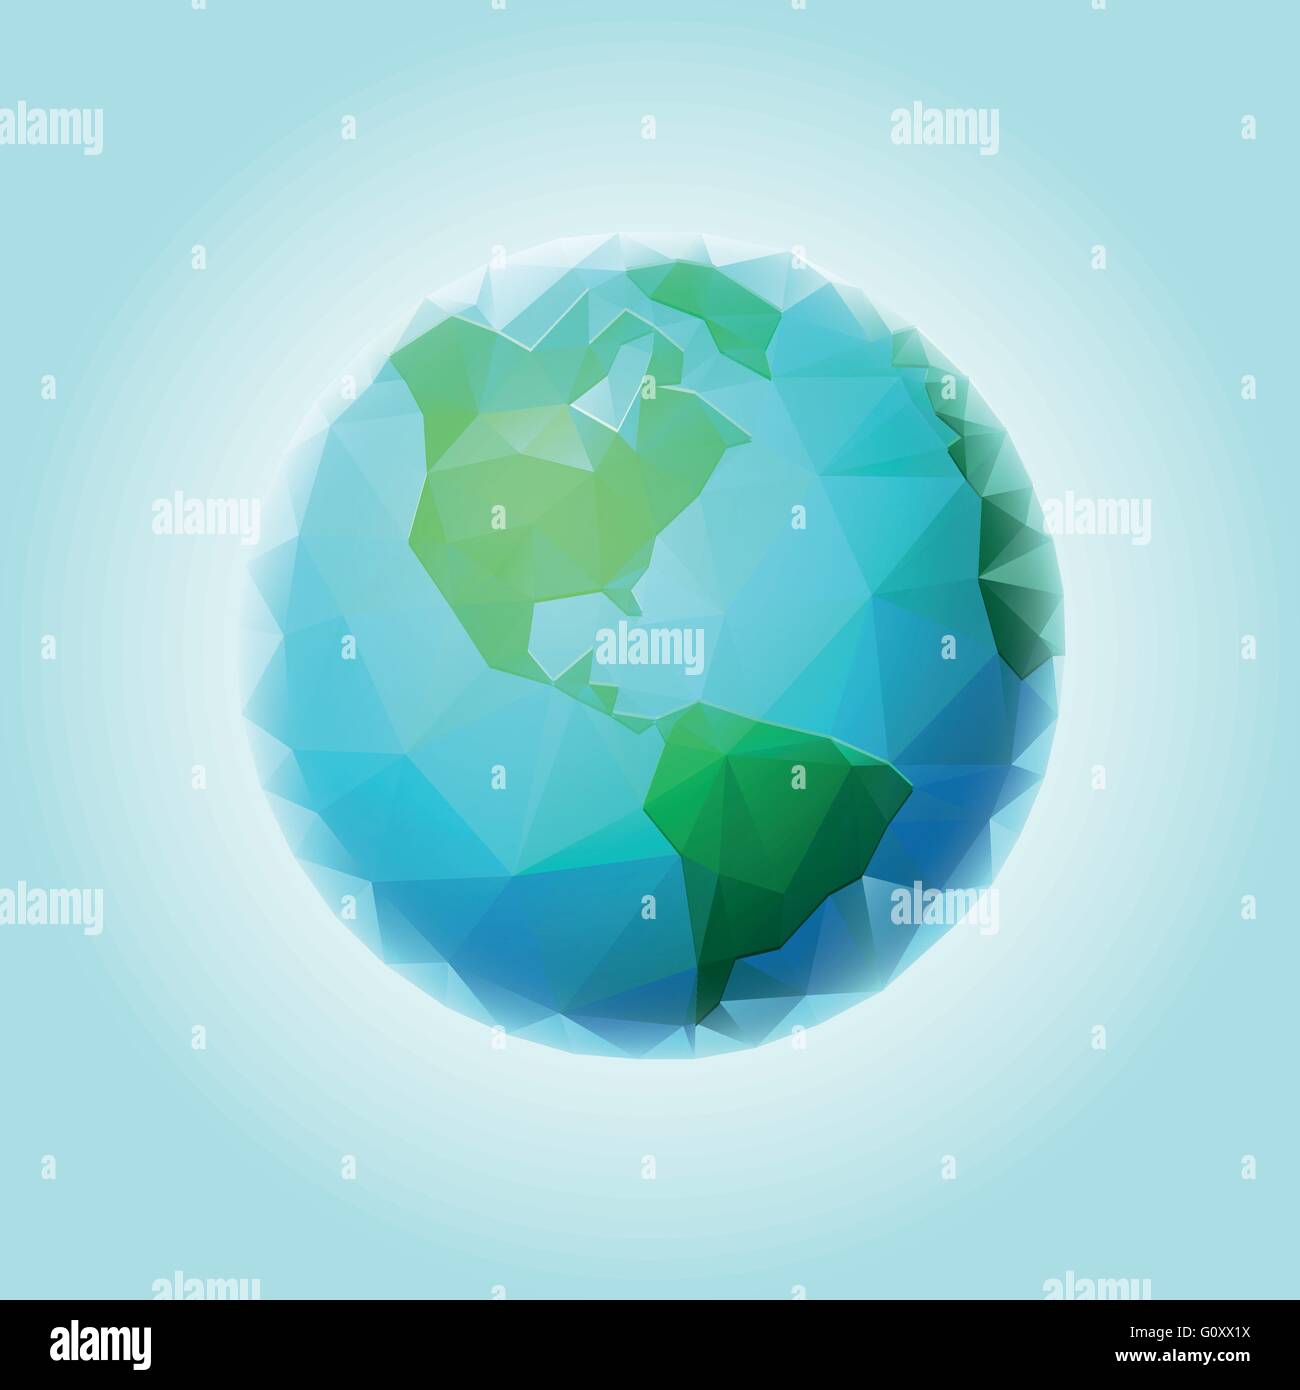 https://c8.alamy.com/comp/G0XX1X/vector-polygonal-world-sphere-all-elements-are-layered-separately-G0XX1X.jpg